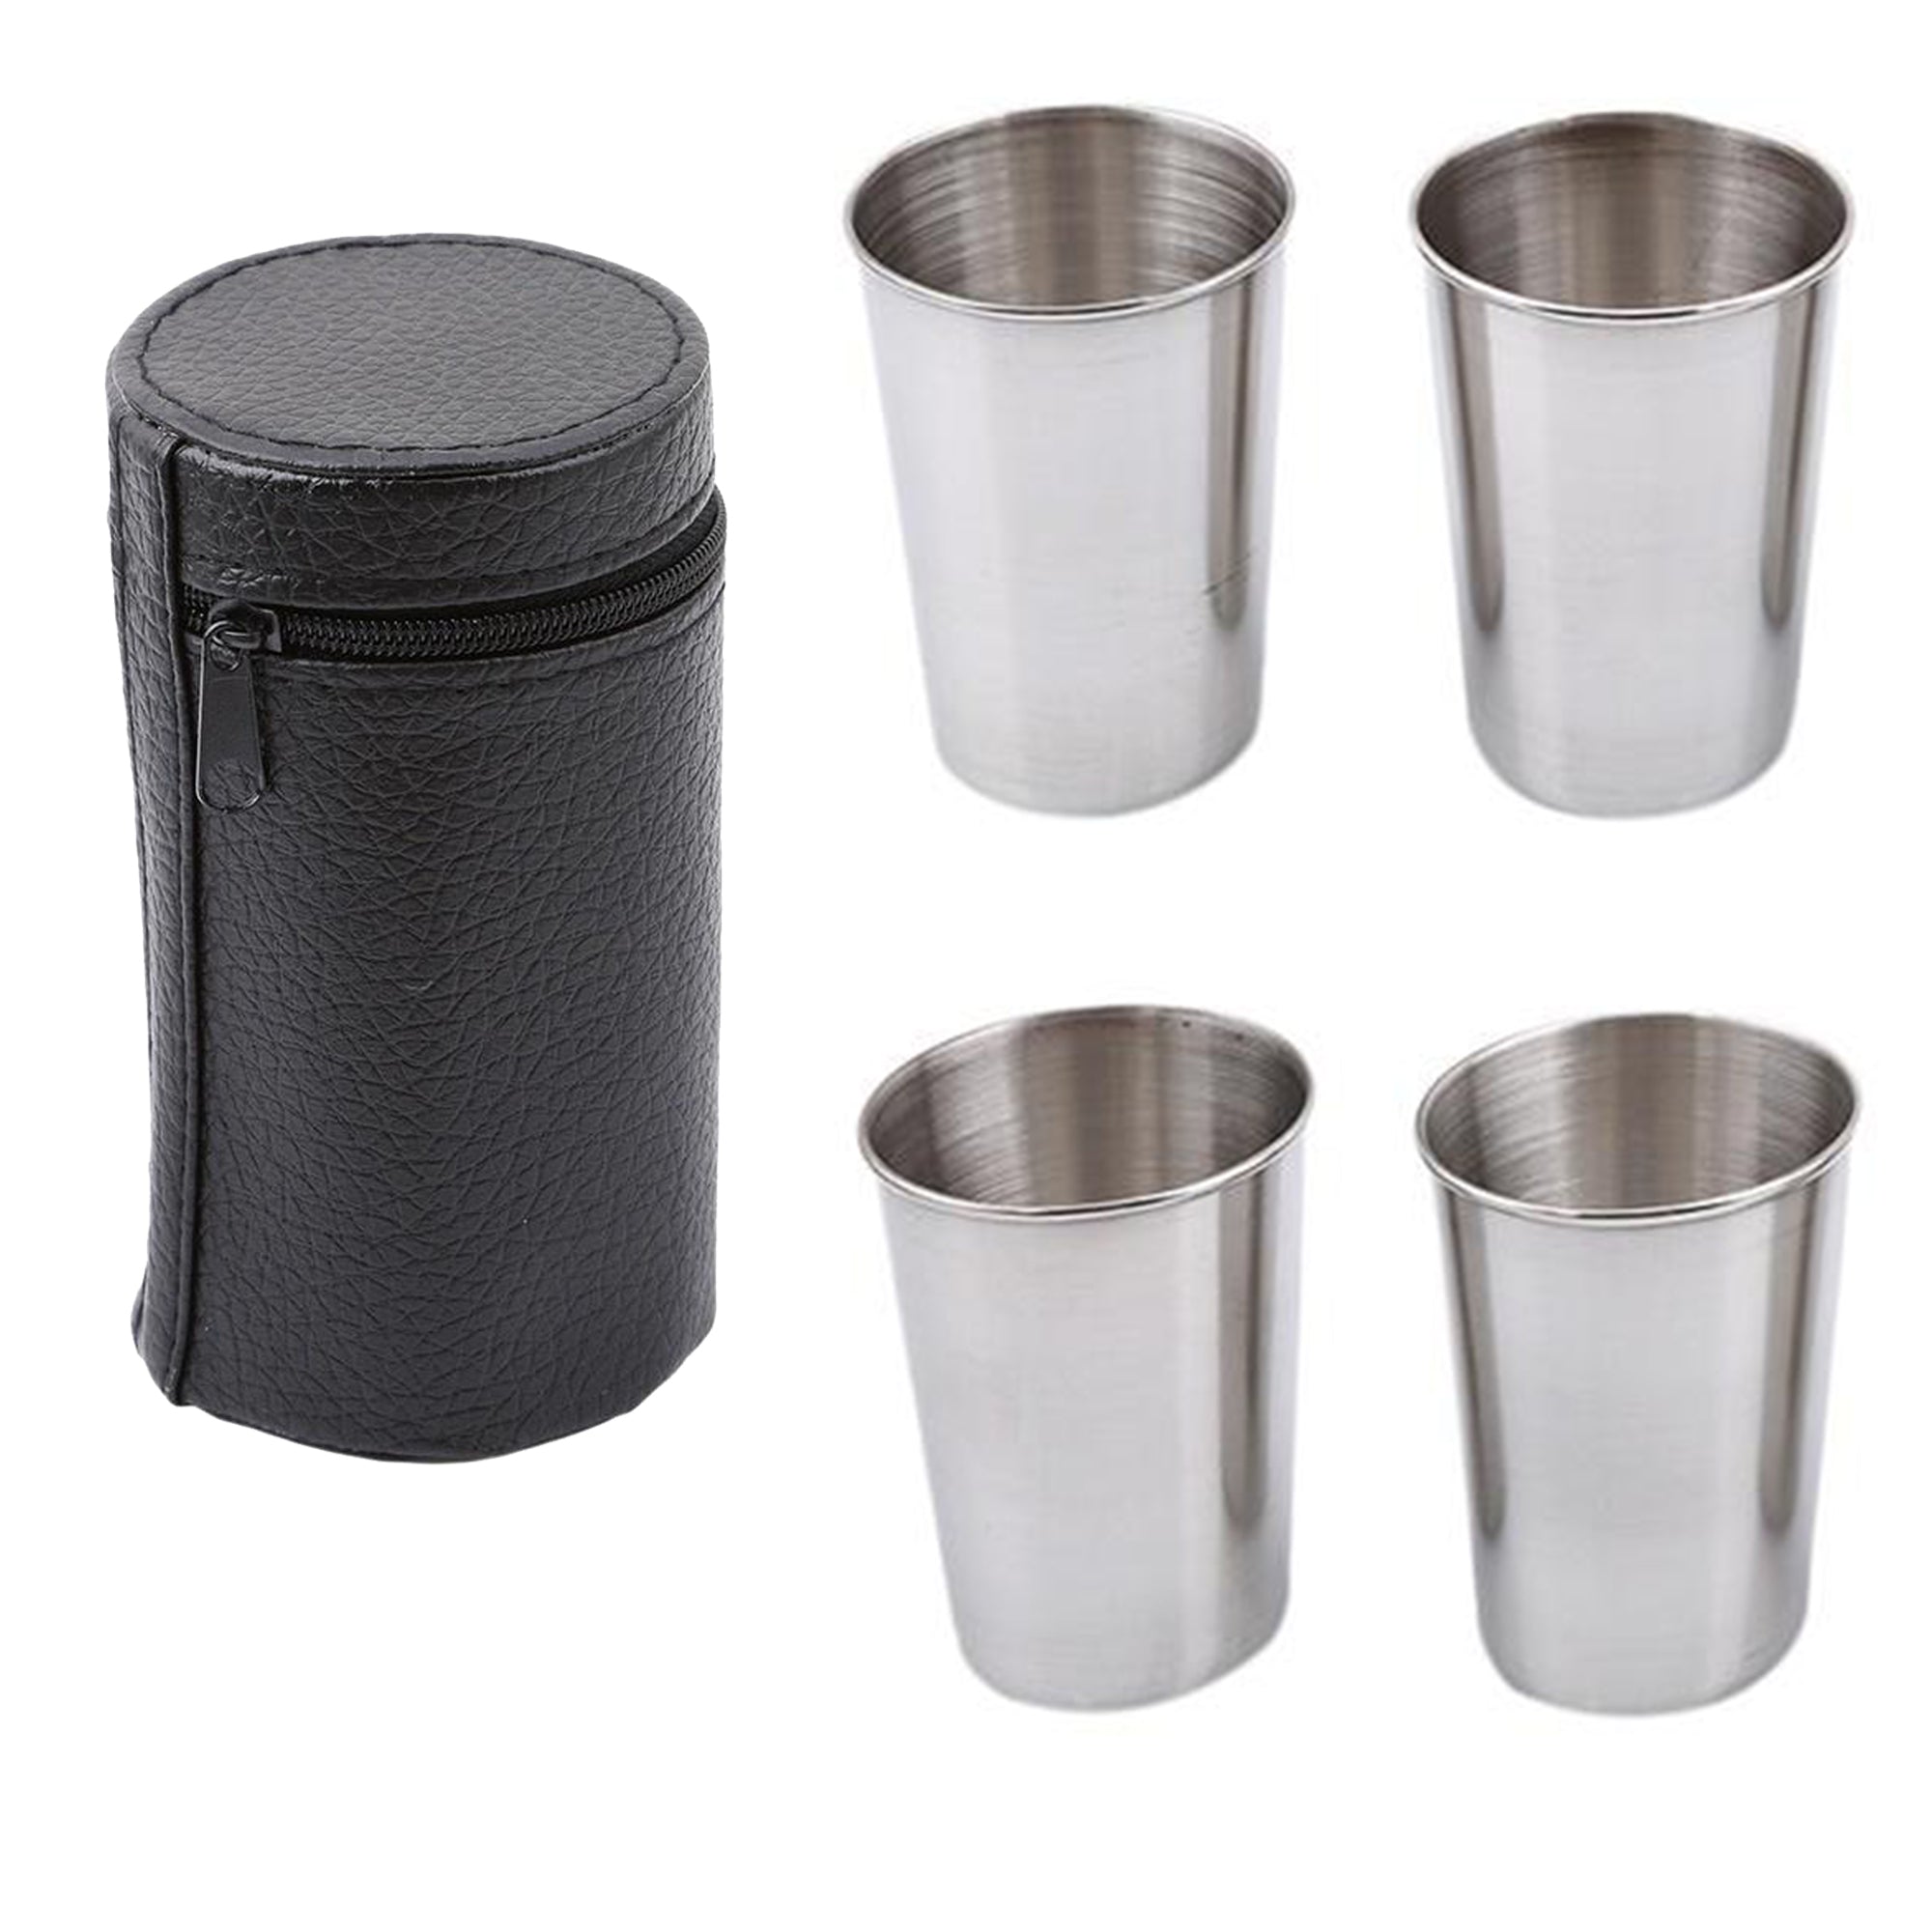 LMA 4 Pack Stainless Steel Travel Cup Set with Carry Pouch FX-8886-C